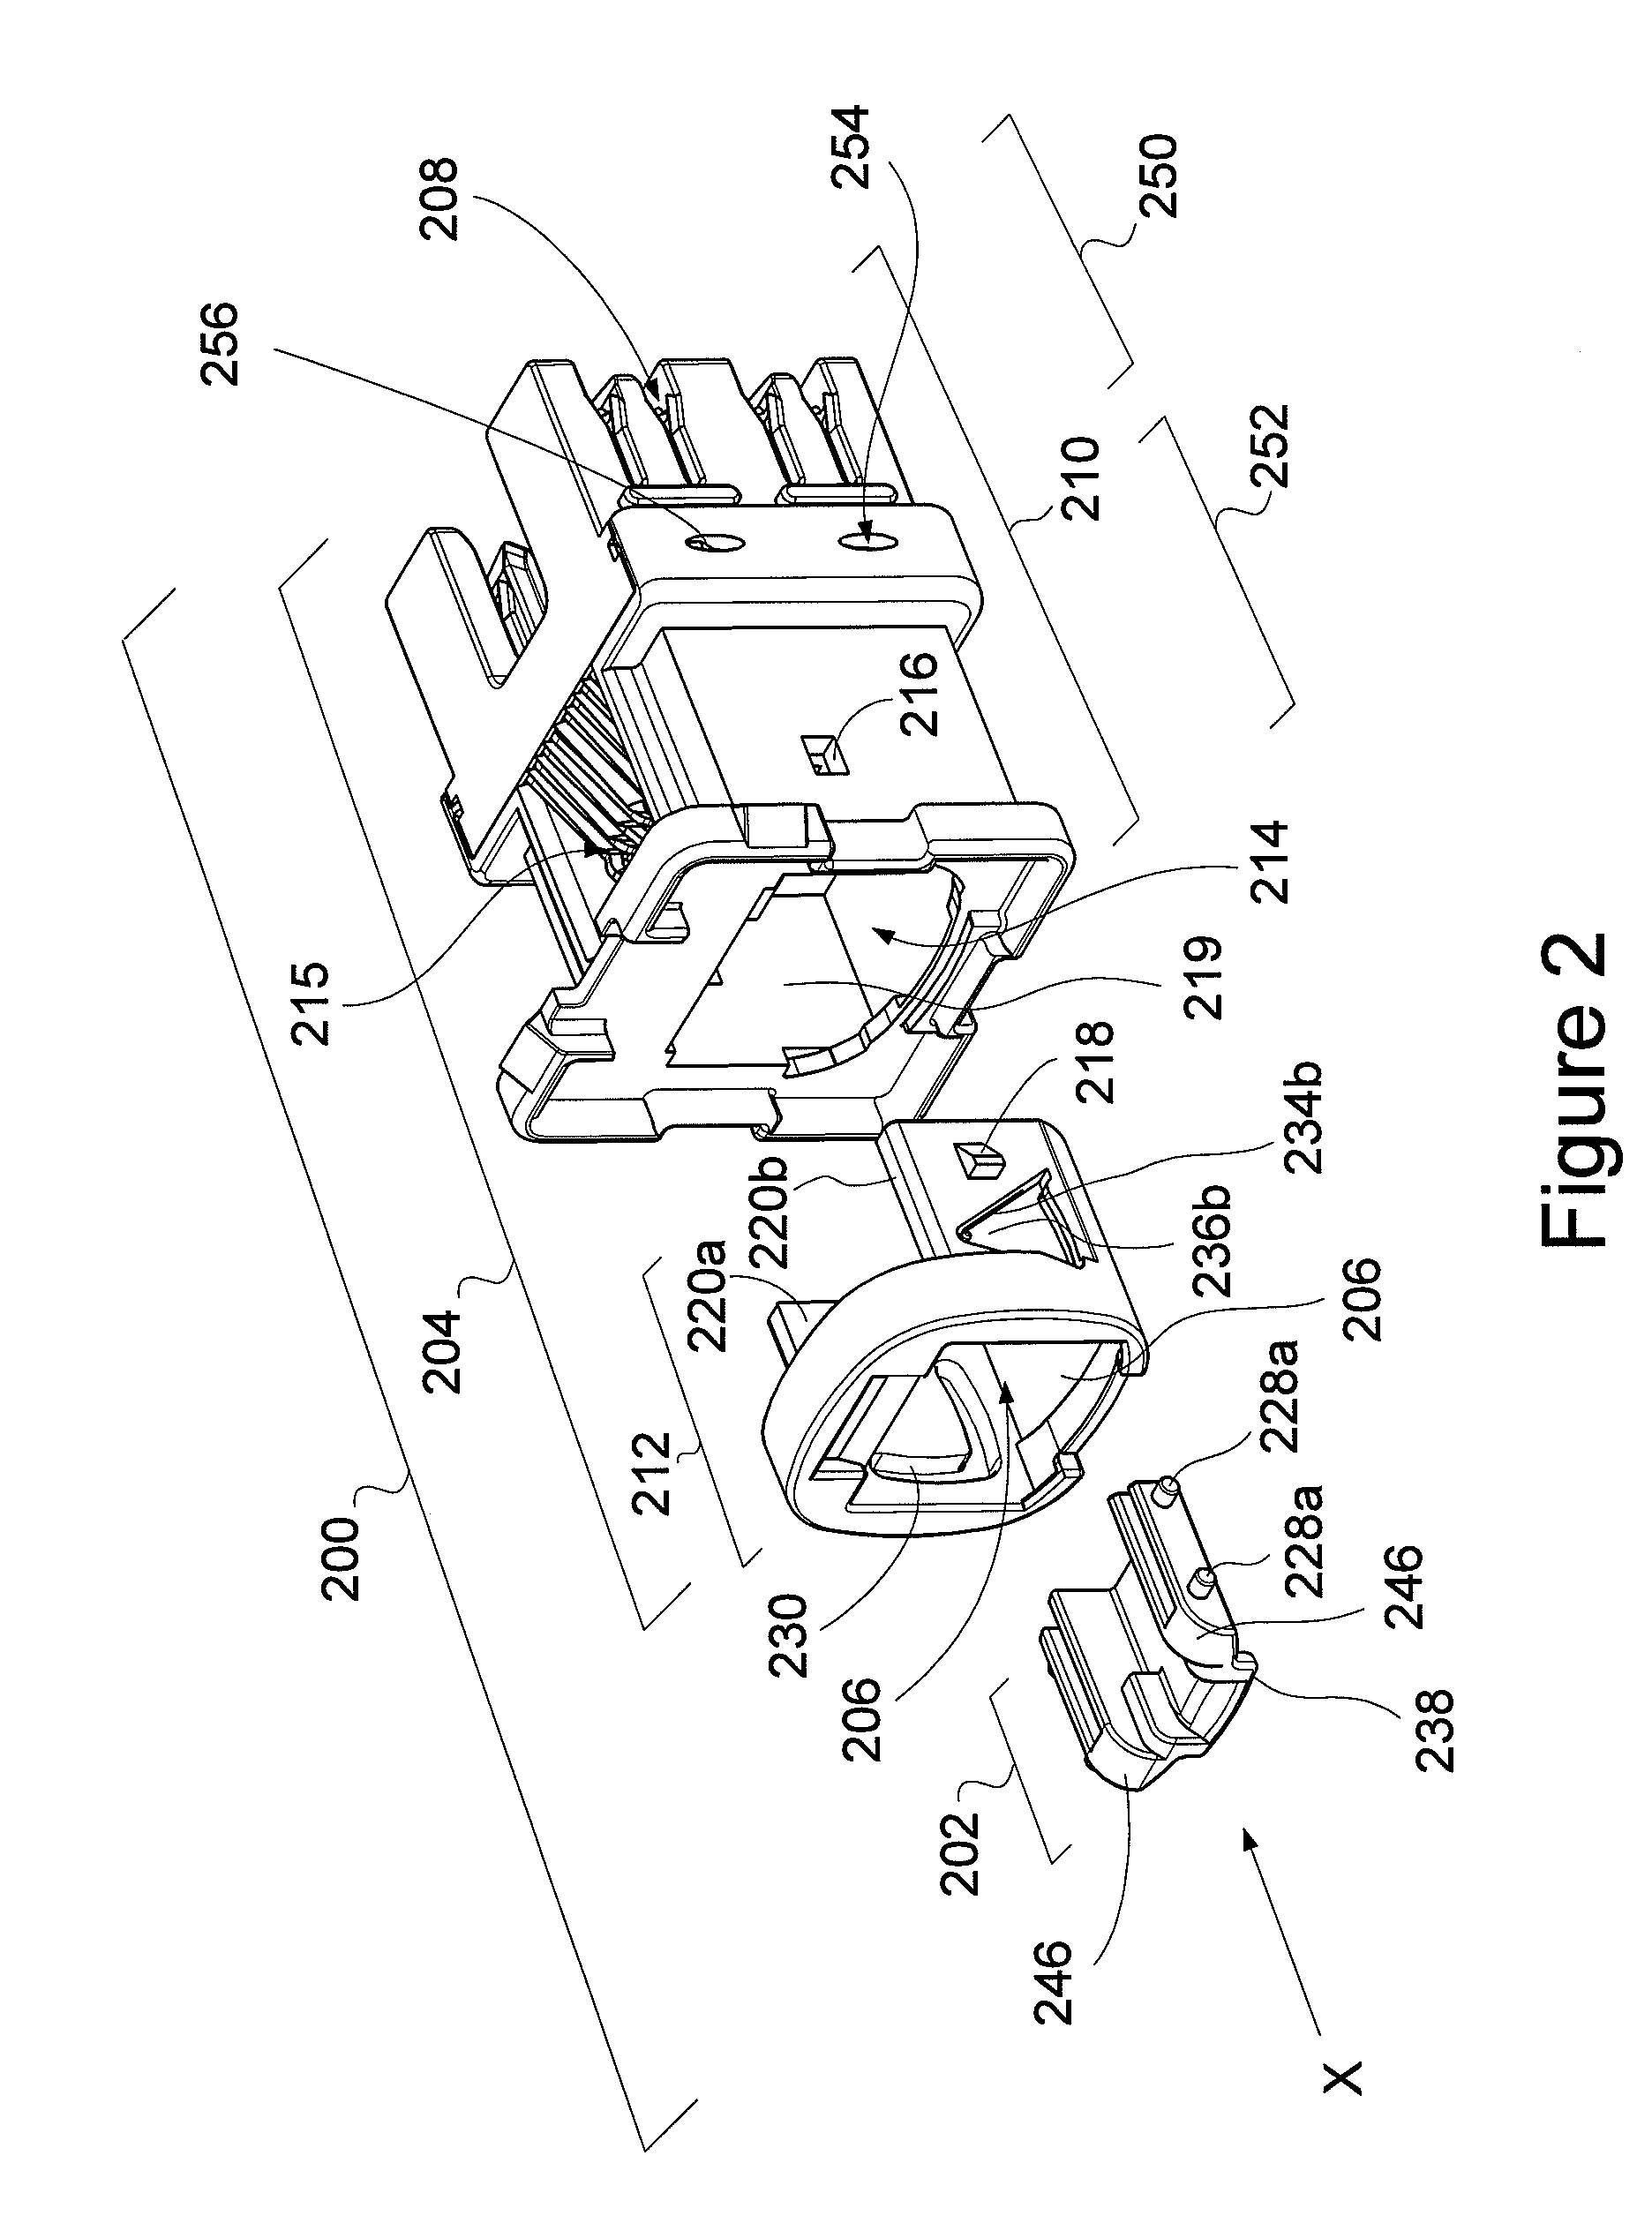 Electrical connector having a protective door element